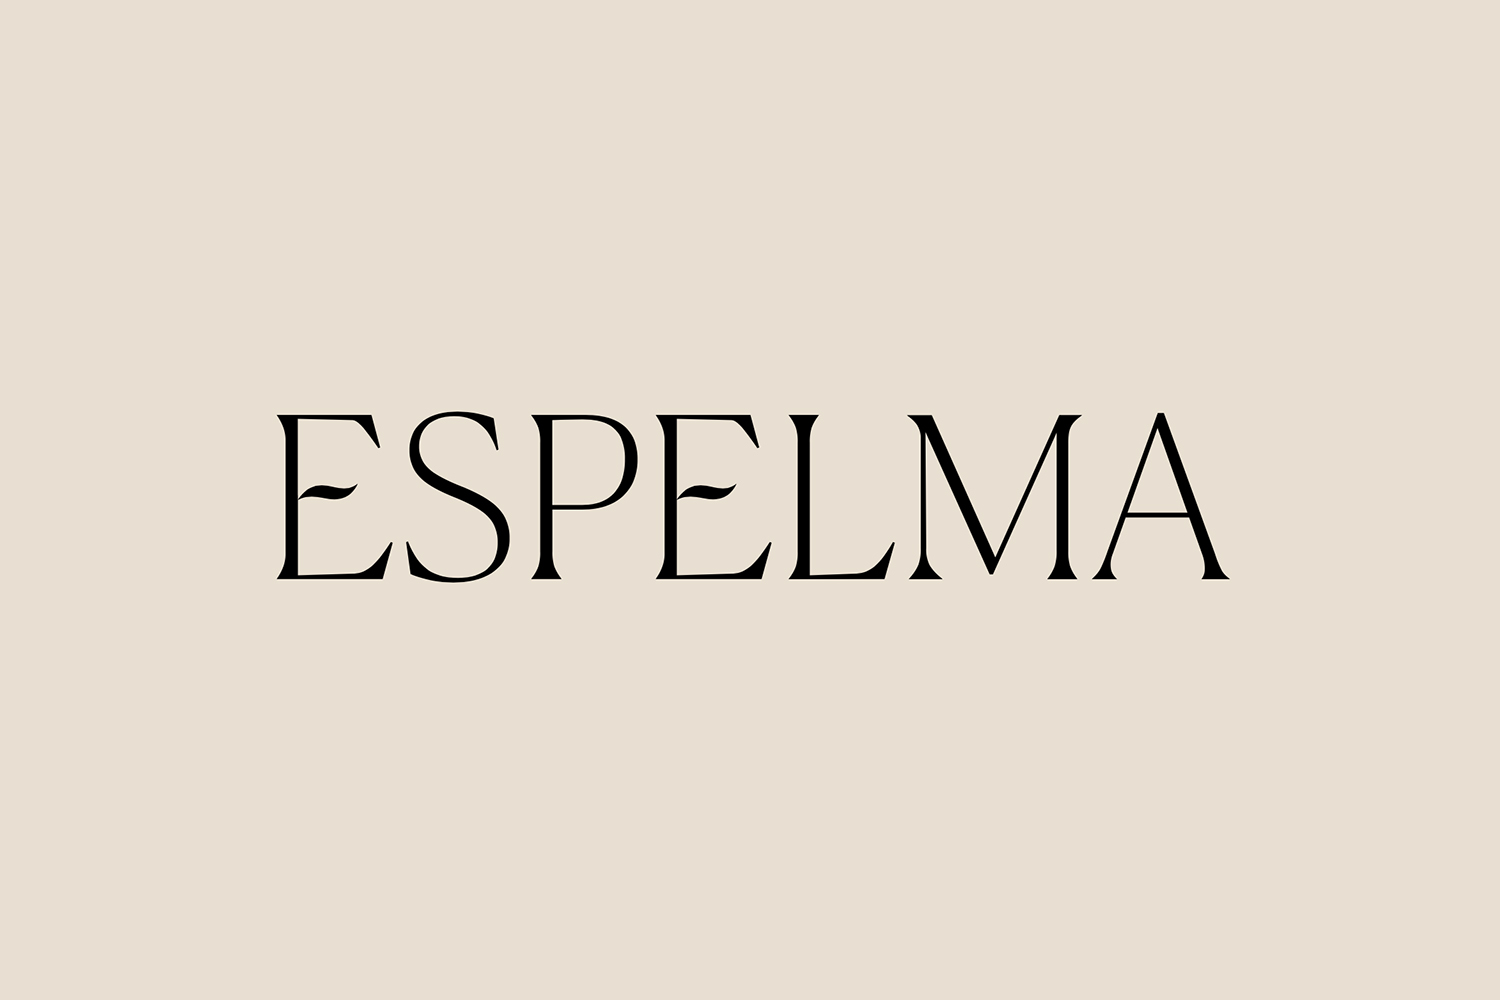 Creative Logotype Gallery & Inspiration: Espelma by Commission